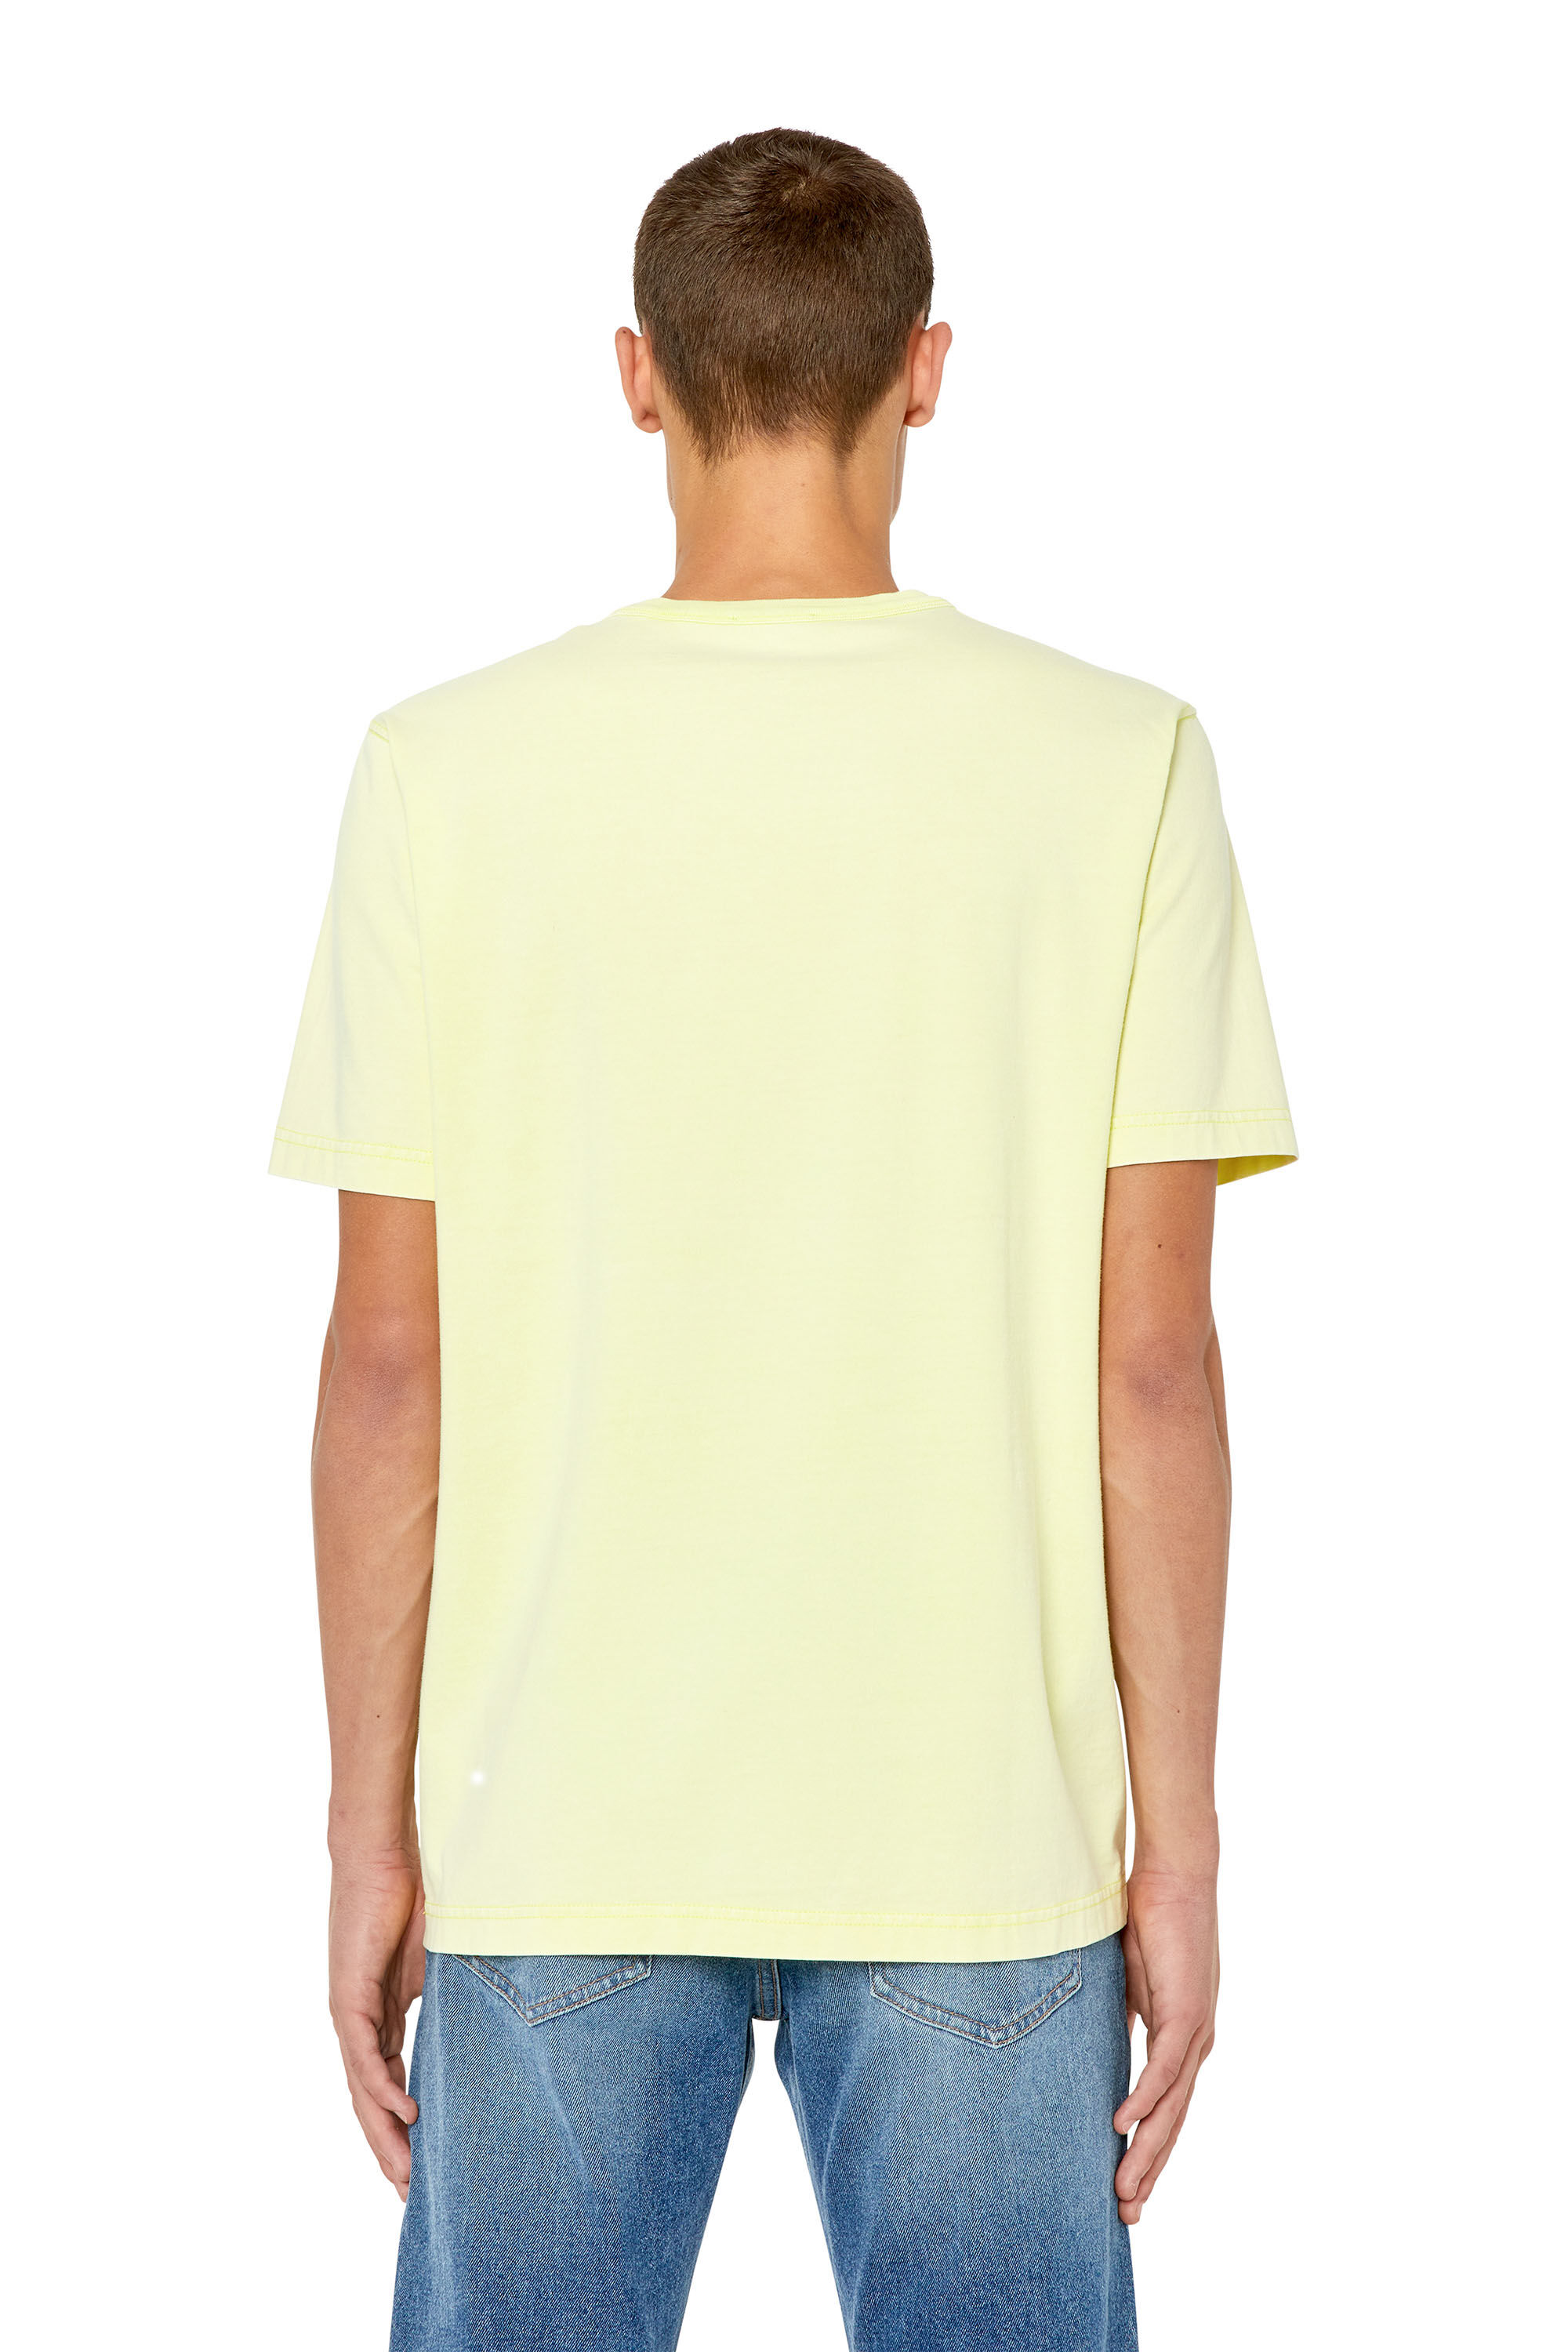 Diesel - T-JUST-G14, Yellow Fluo - Image 4